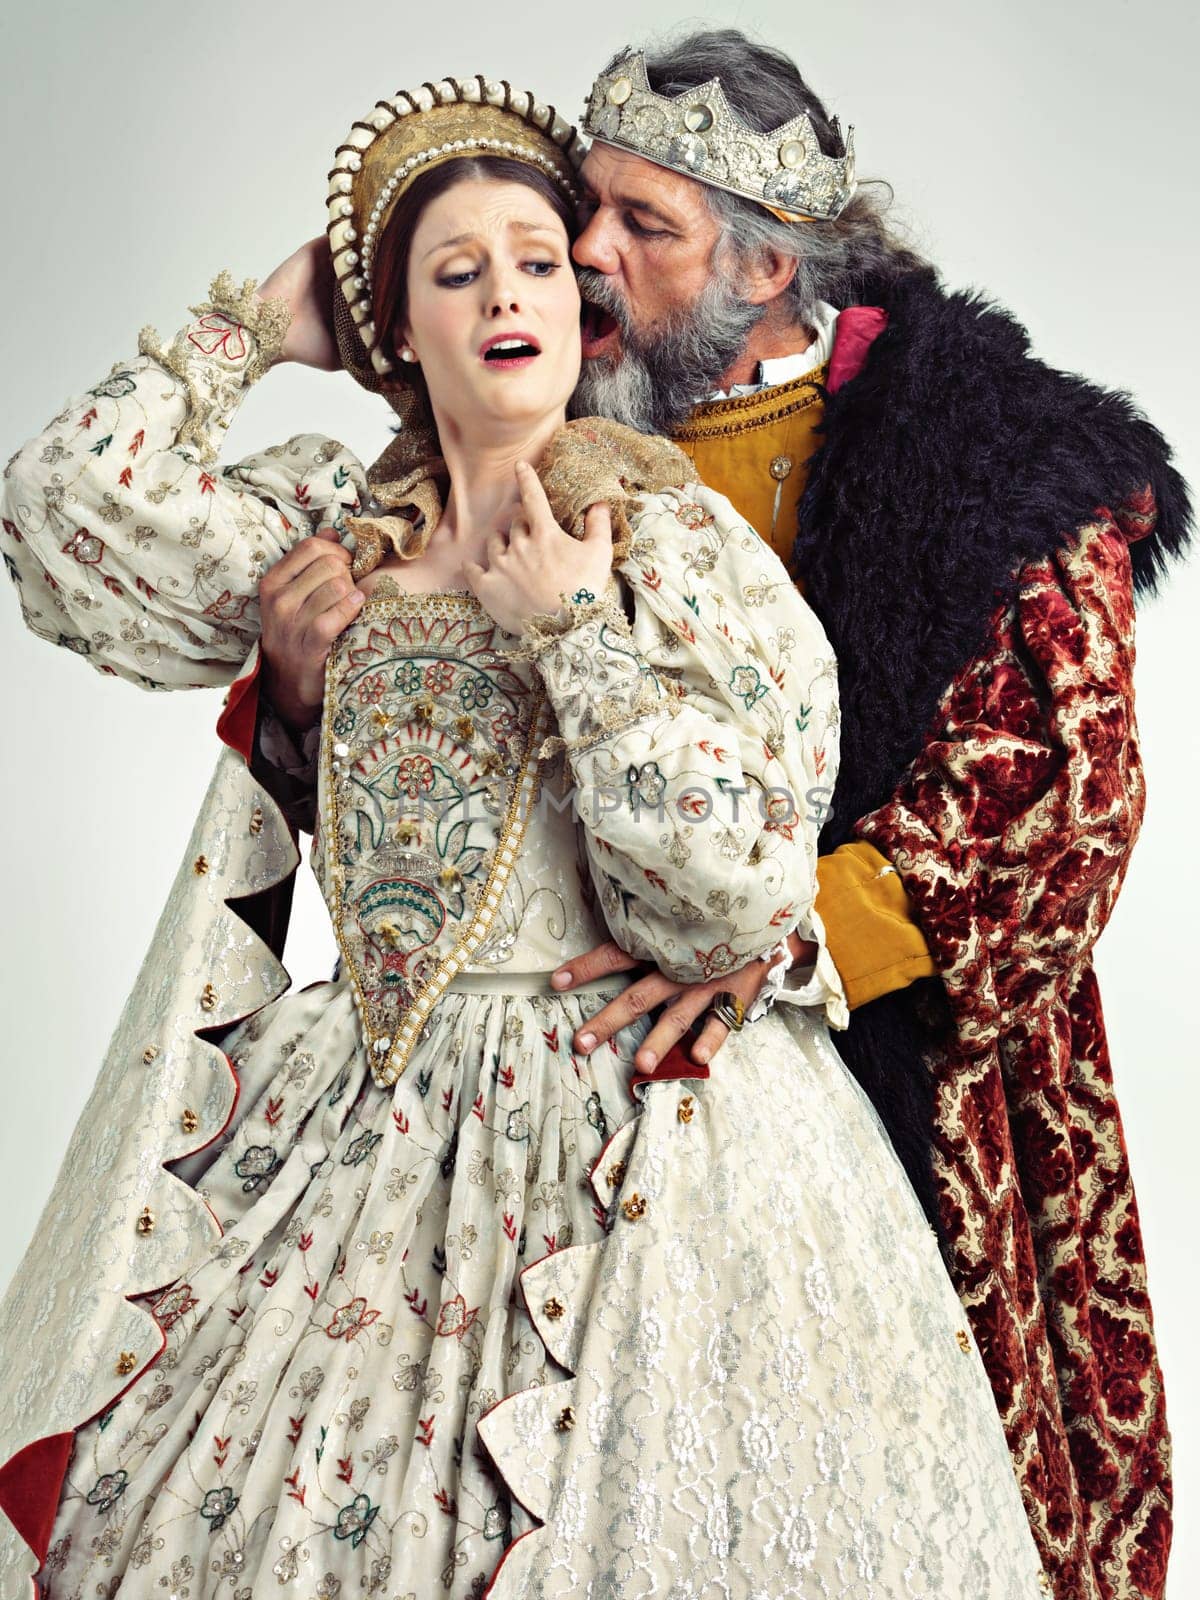 Medieval king, queen and violence in studio for drama, danger and together with renaissance clothes. Ancient royal couple, surprise and shock with distress, crying and actor with vintage fashion.